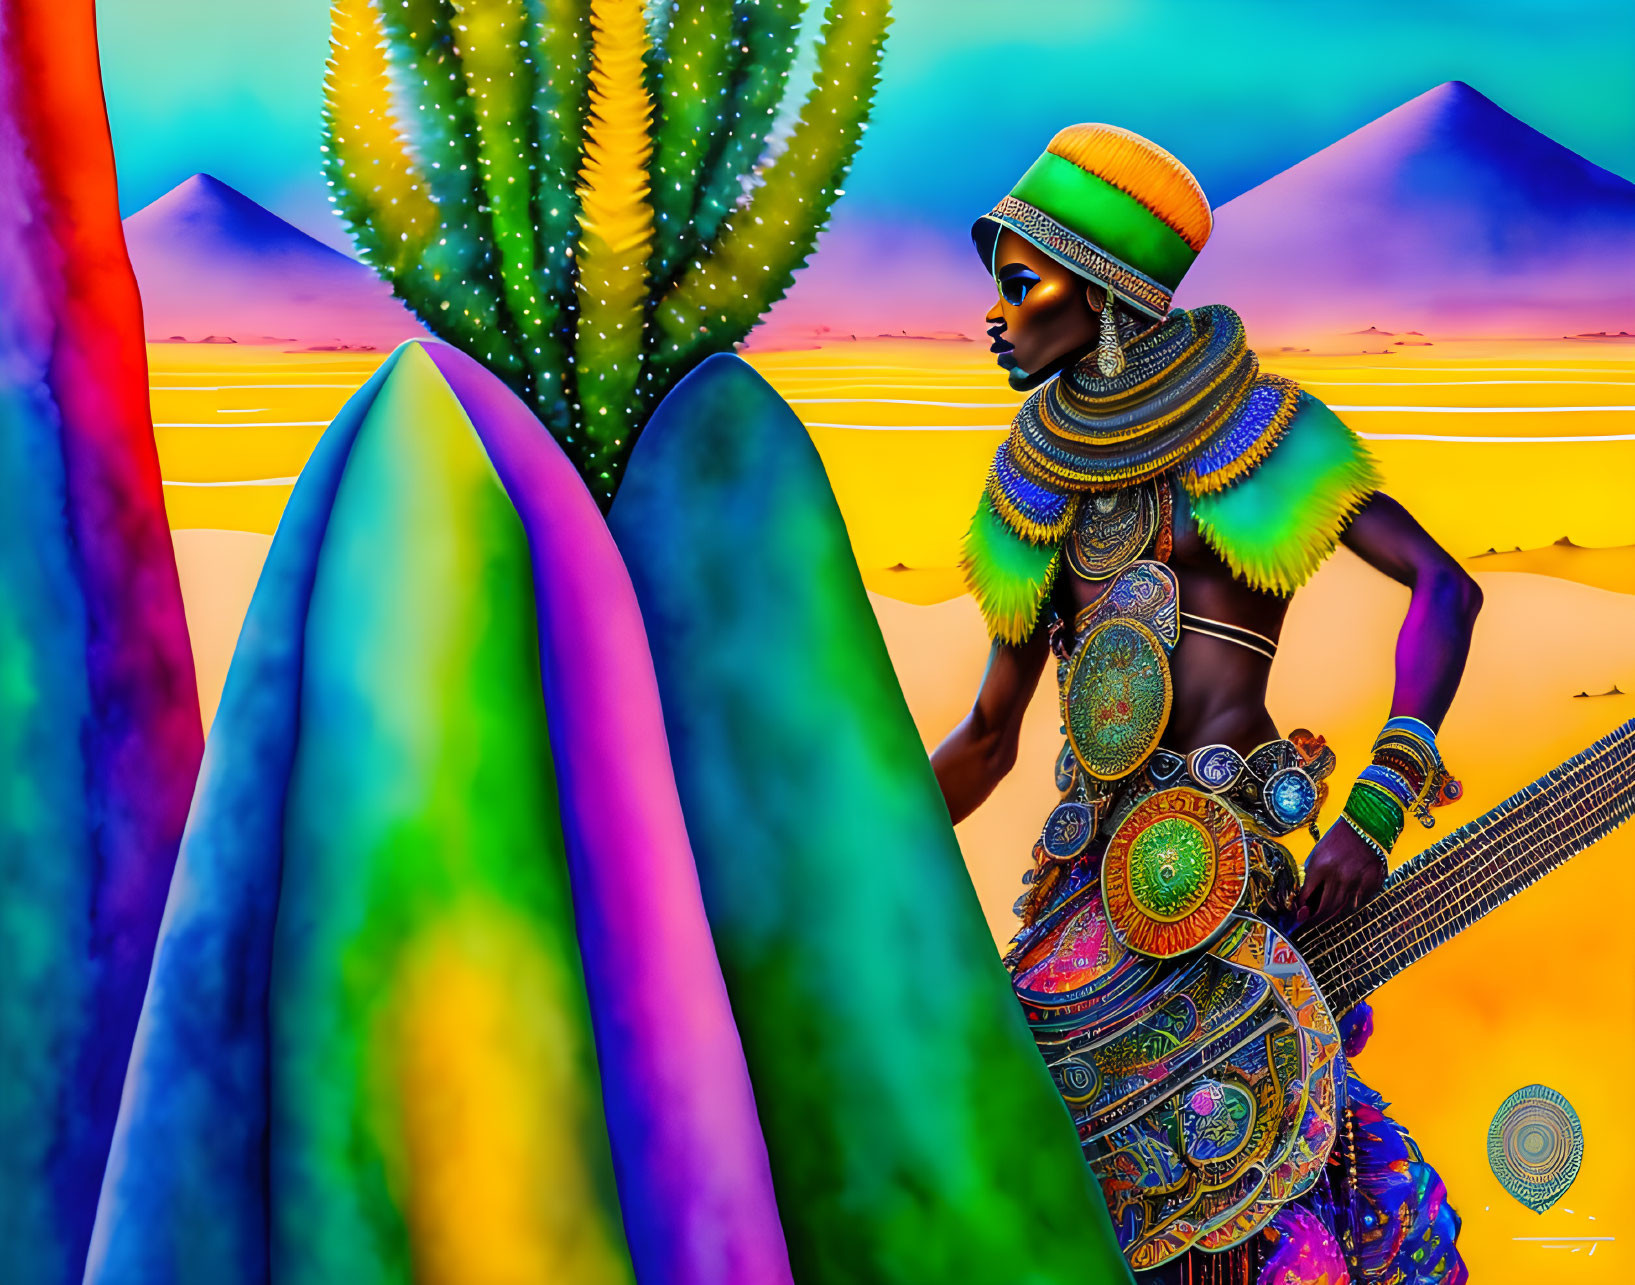 Colorful illustration of woman with beaded jewelry and guitar in desert scene